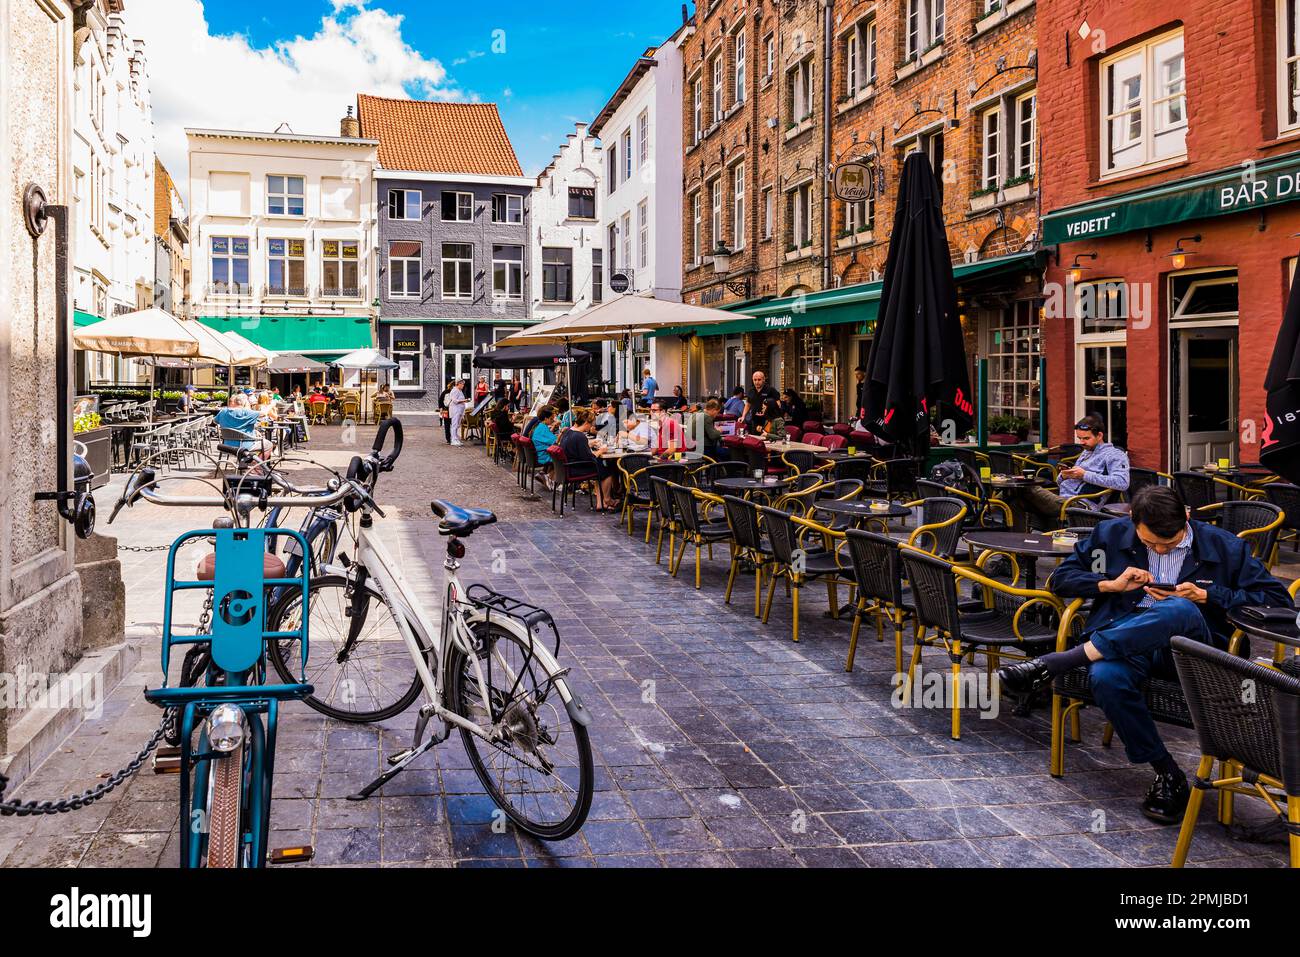 The lively Egg Market, Eiermarkt, a square full of atmosphere. Bruges, West Flanders, Belgium, Europe Stock Photo